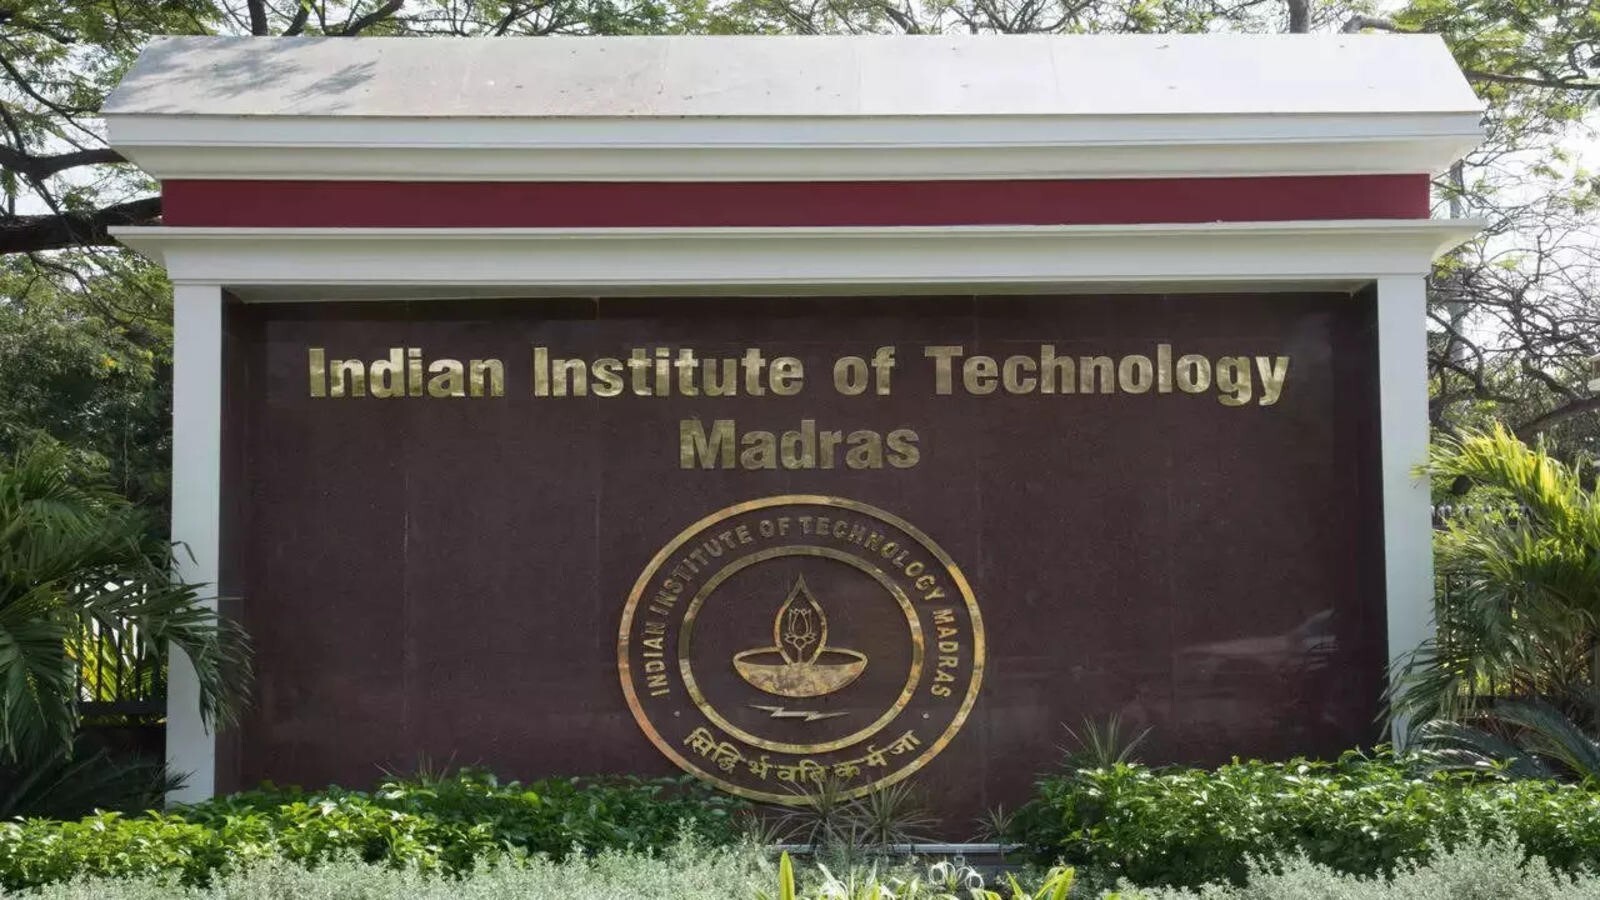 IIT Madras discovers water droplets can break minerals into nanoparticles